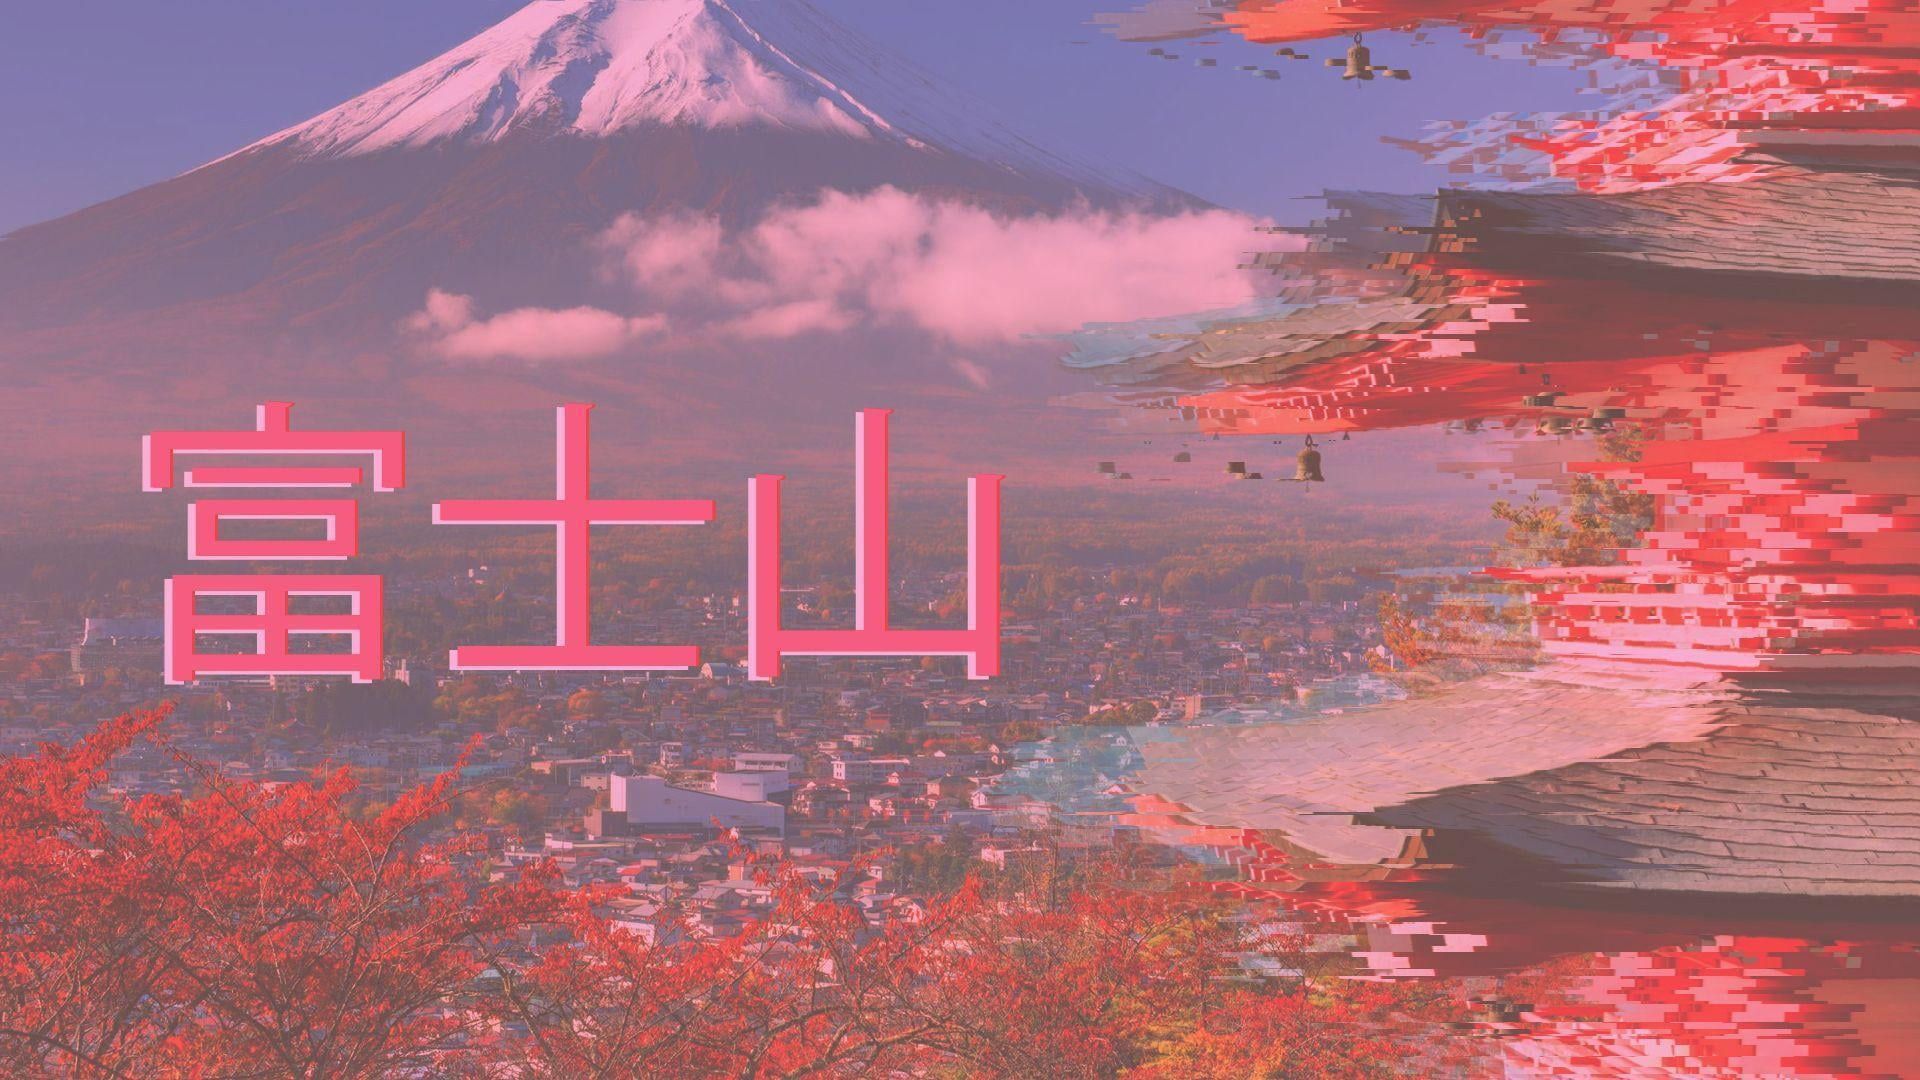 A pixelated image of Mt. Fuji with the word 